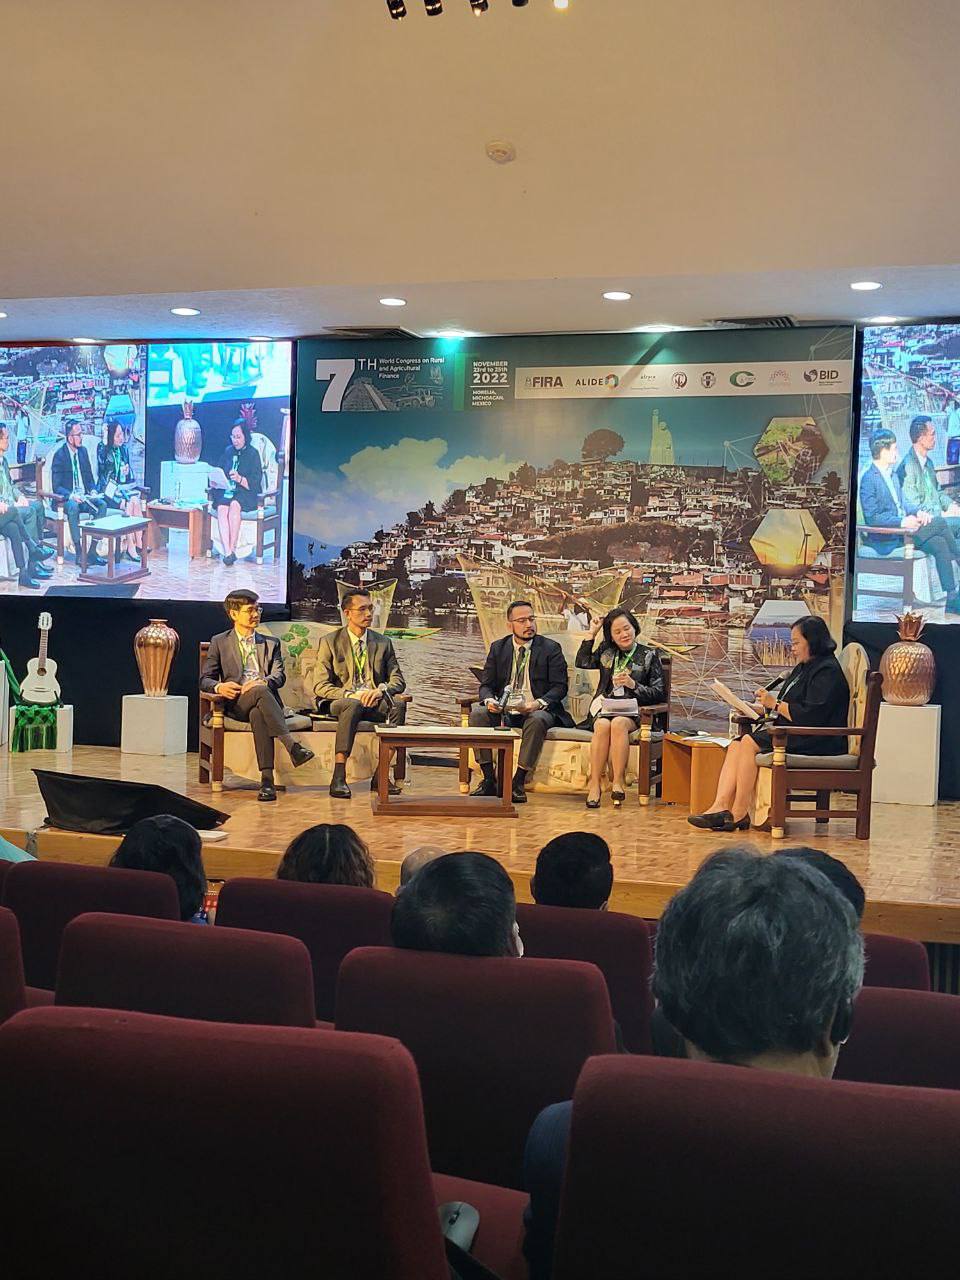 H.E Dr. Soeng Reth and H.E Ban Lim, participated in 7th World Congress on Rural and Agriculture Finance